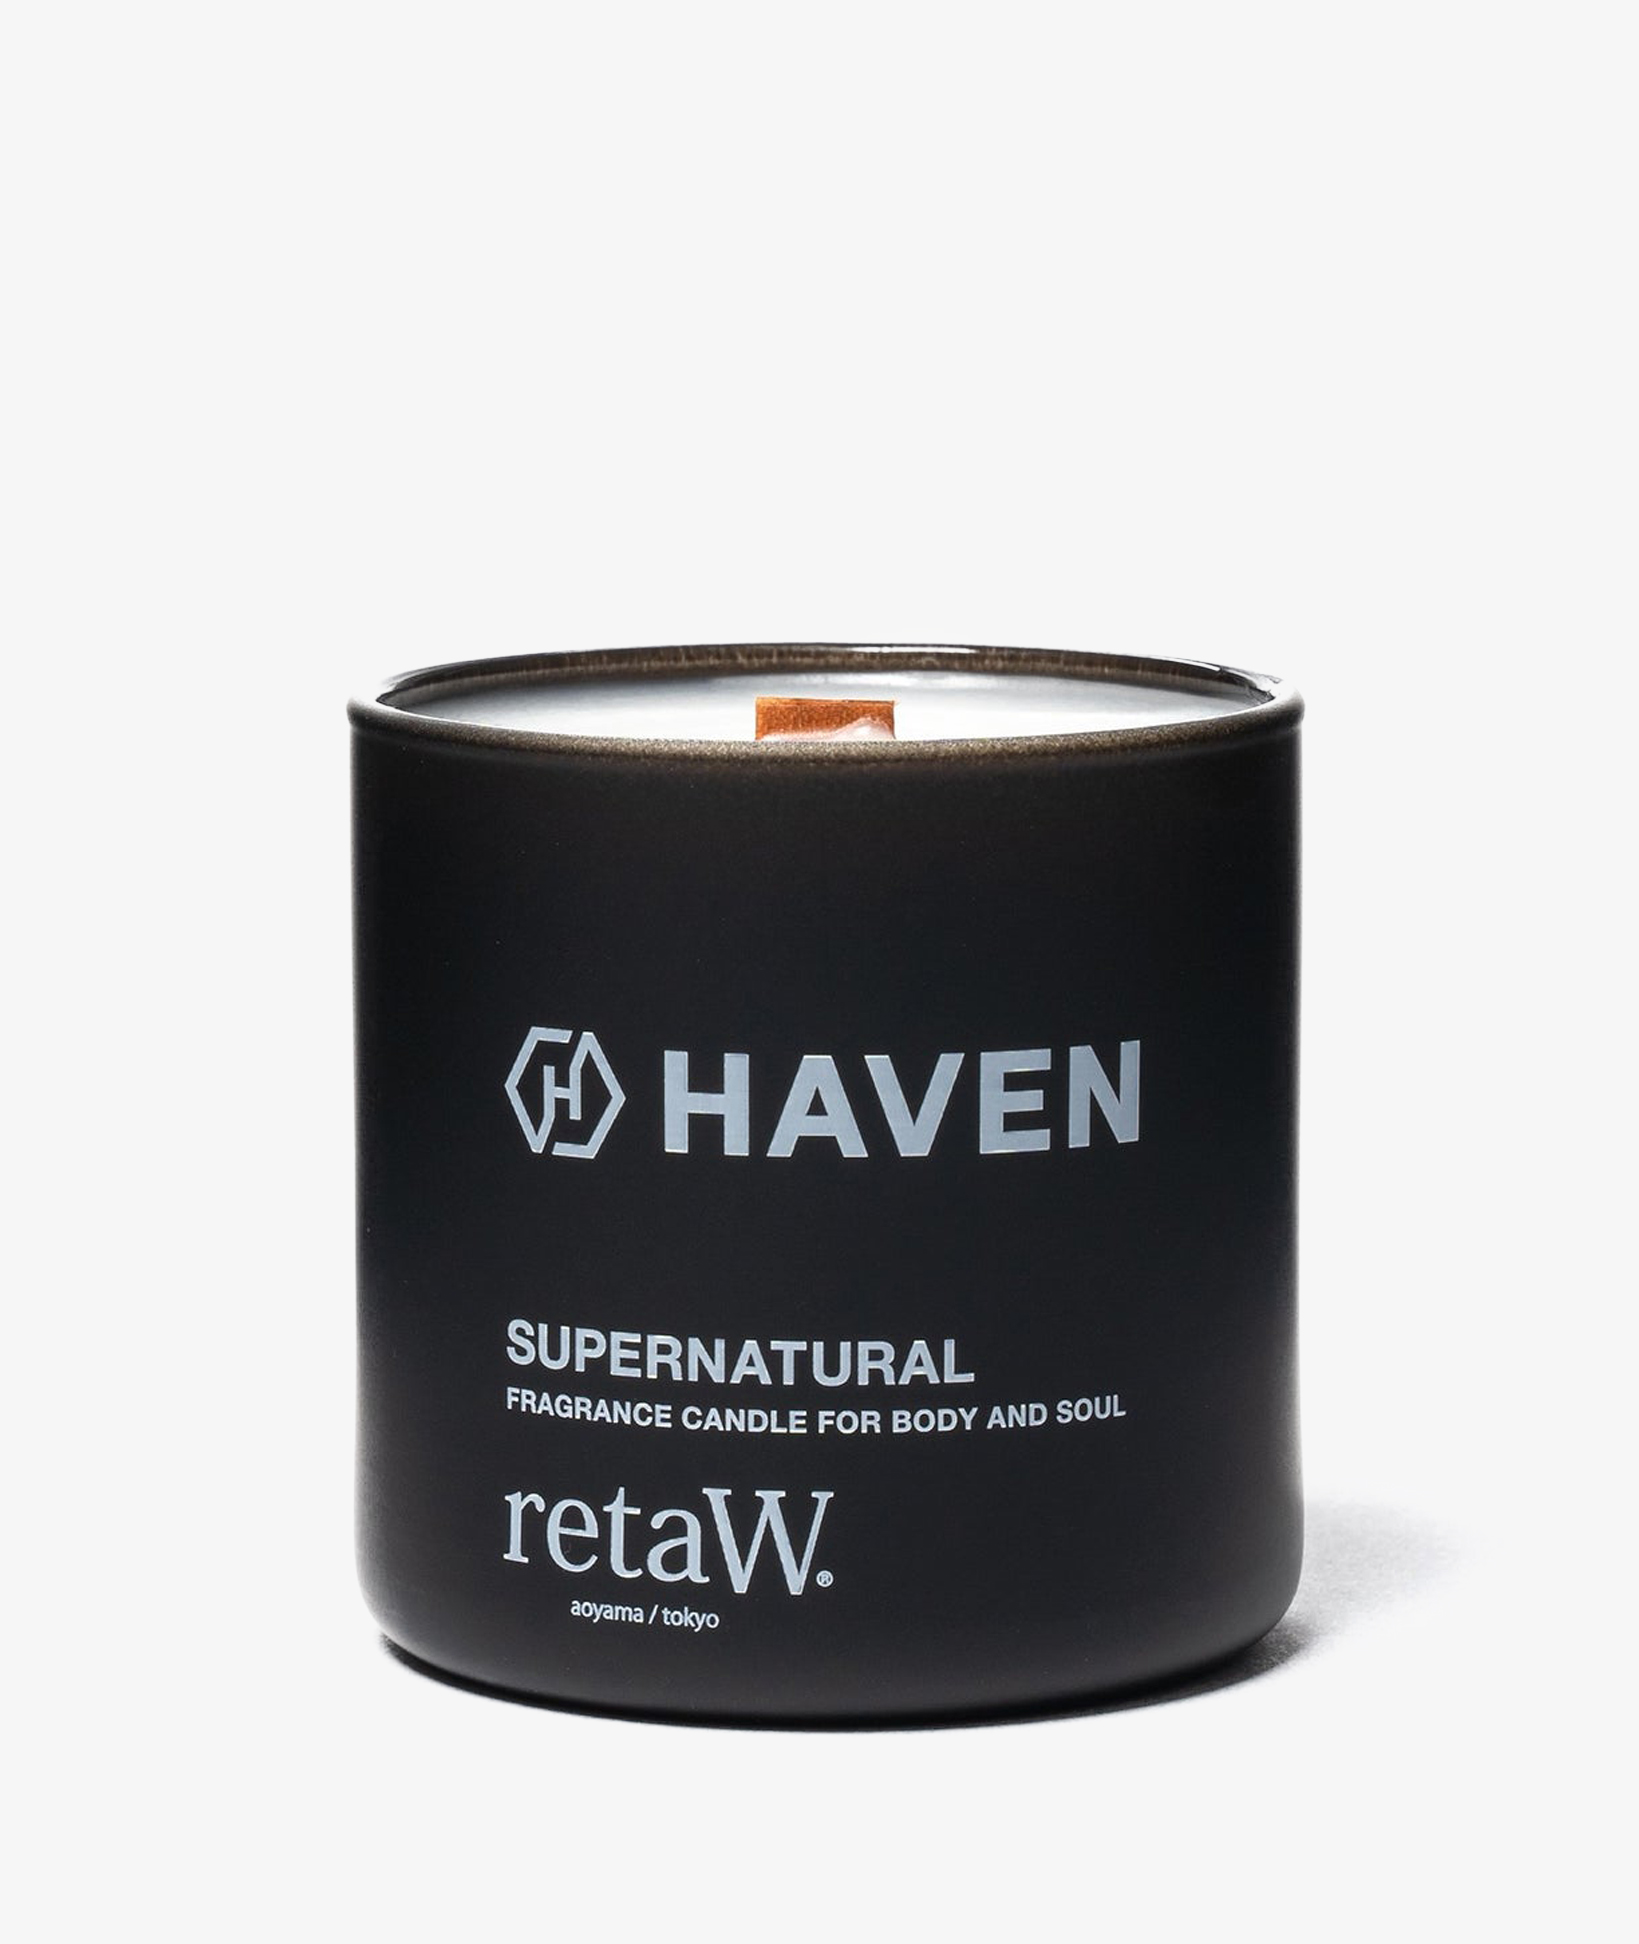 Norse Store | Shipping Worldwide - Haven Retaw Fragrance Candle